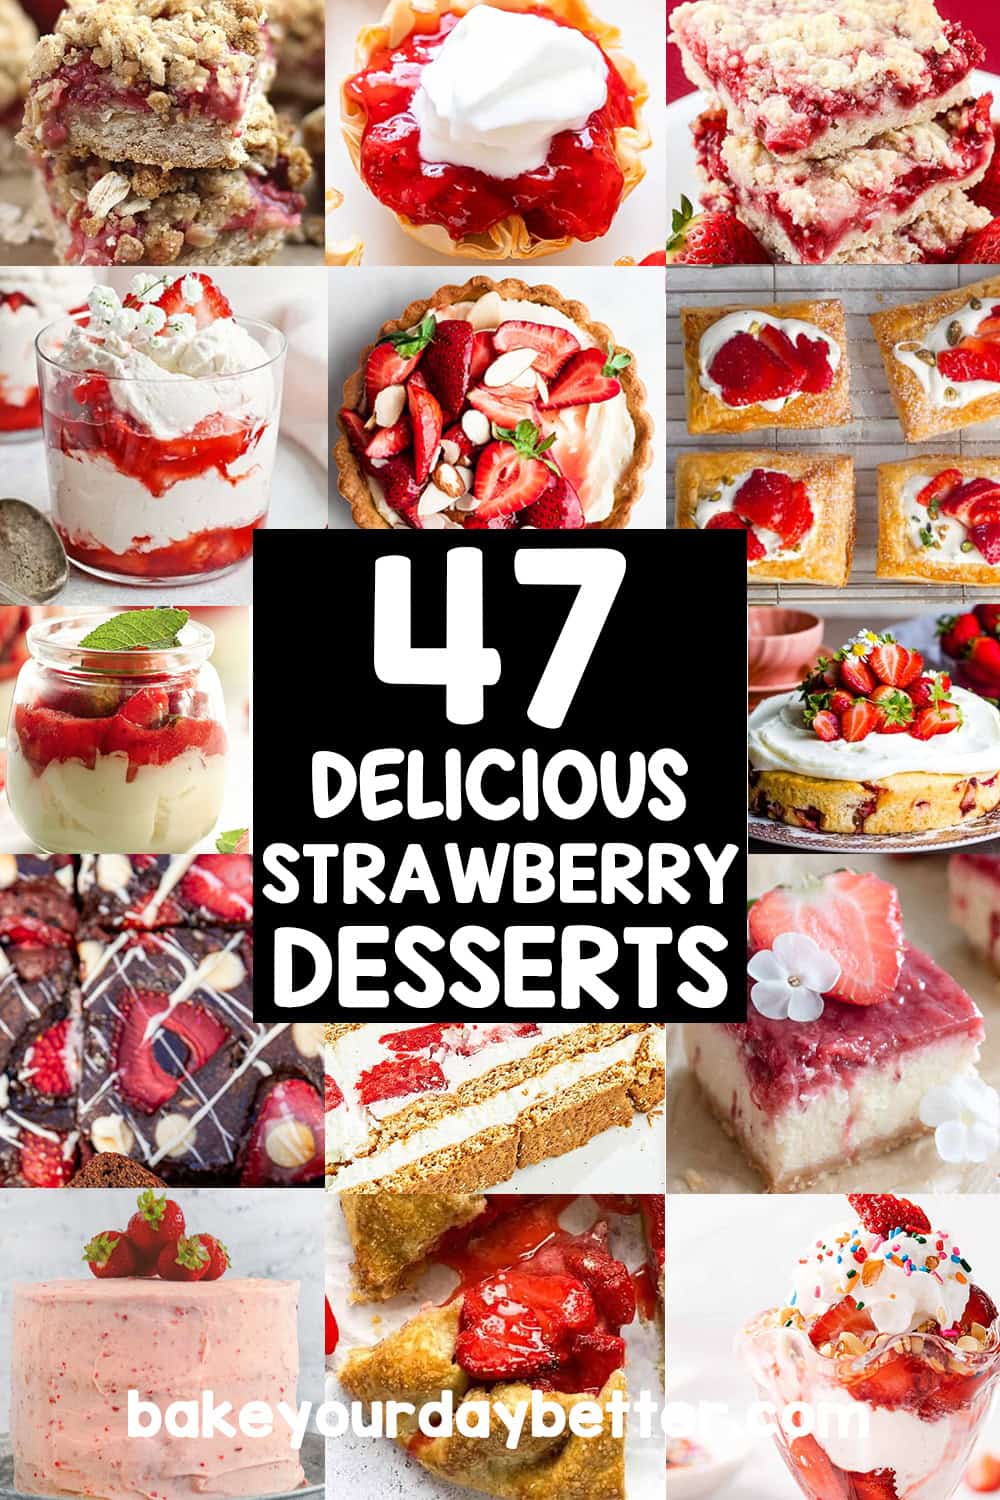 pictures of strawberry desserts with text overlay that says: 47 delicious strawberry desserts